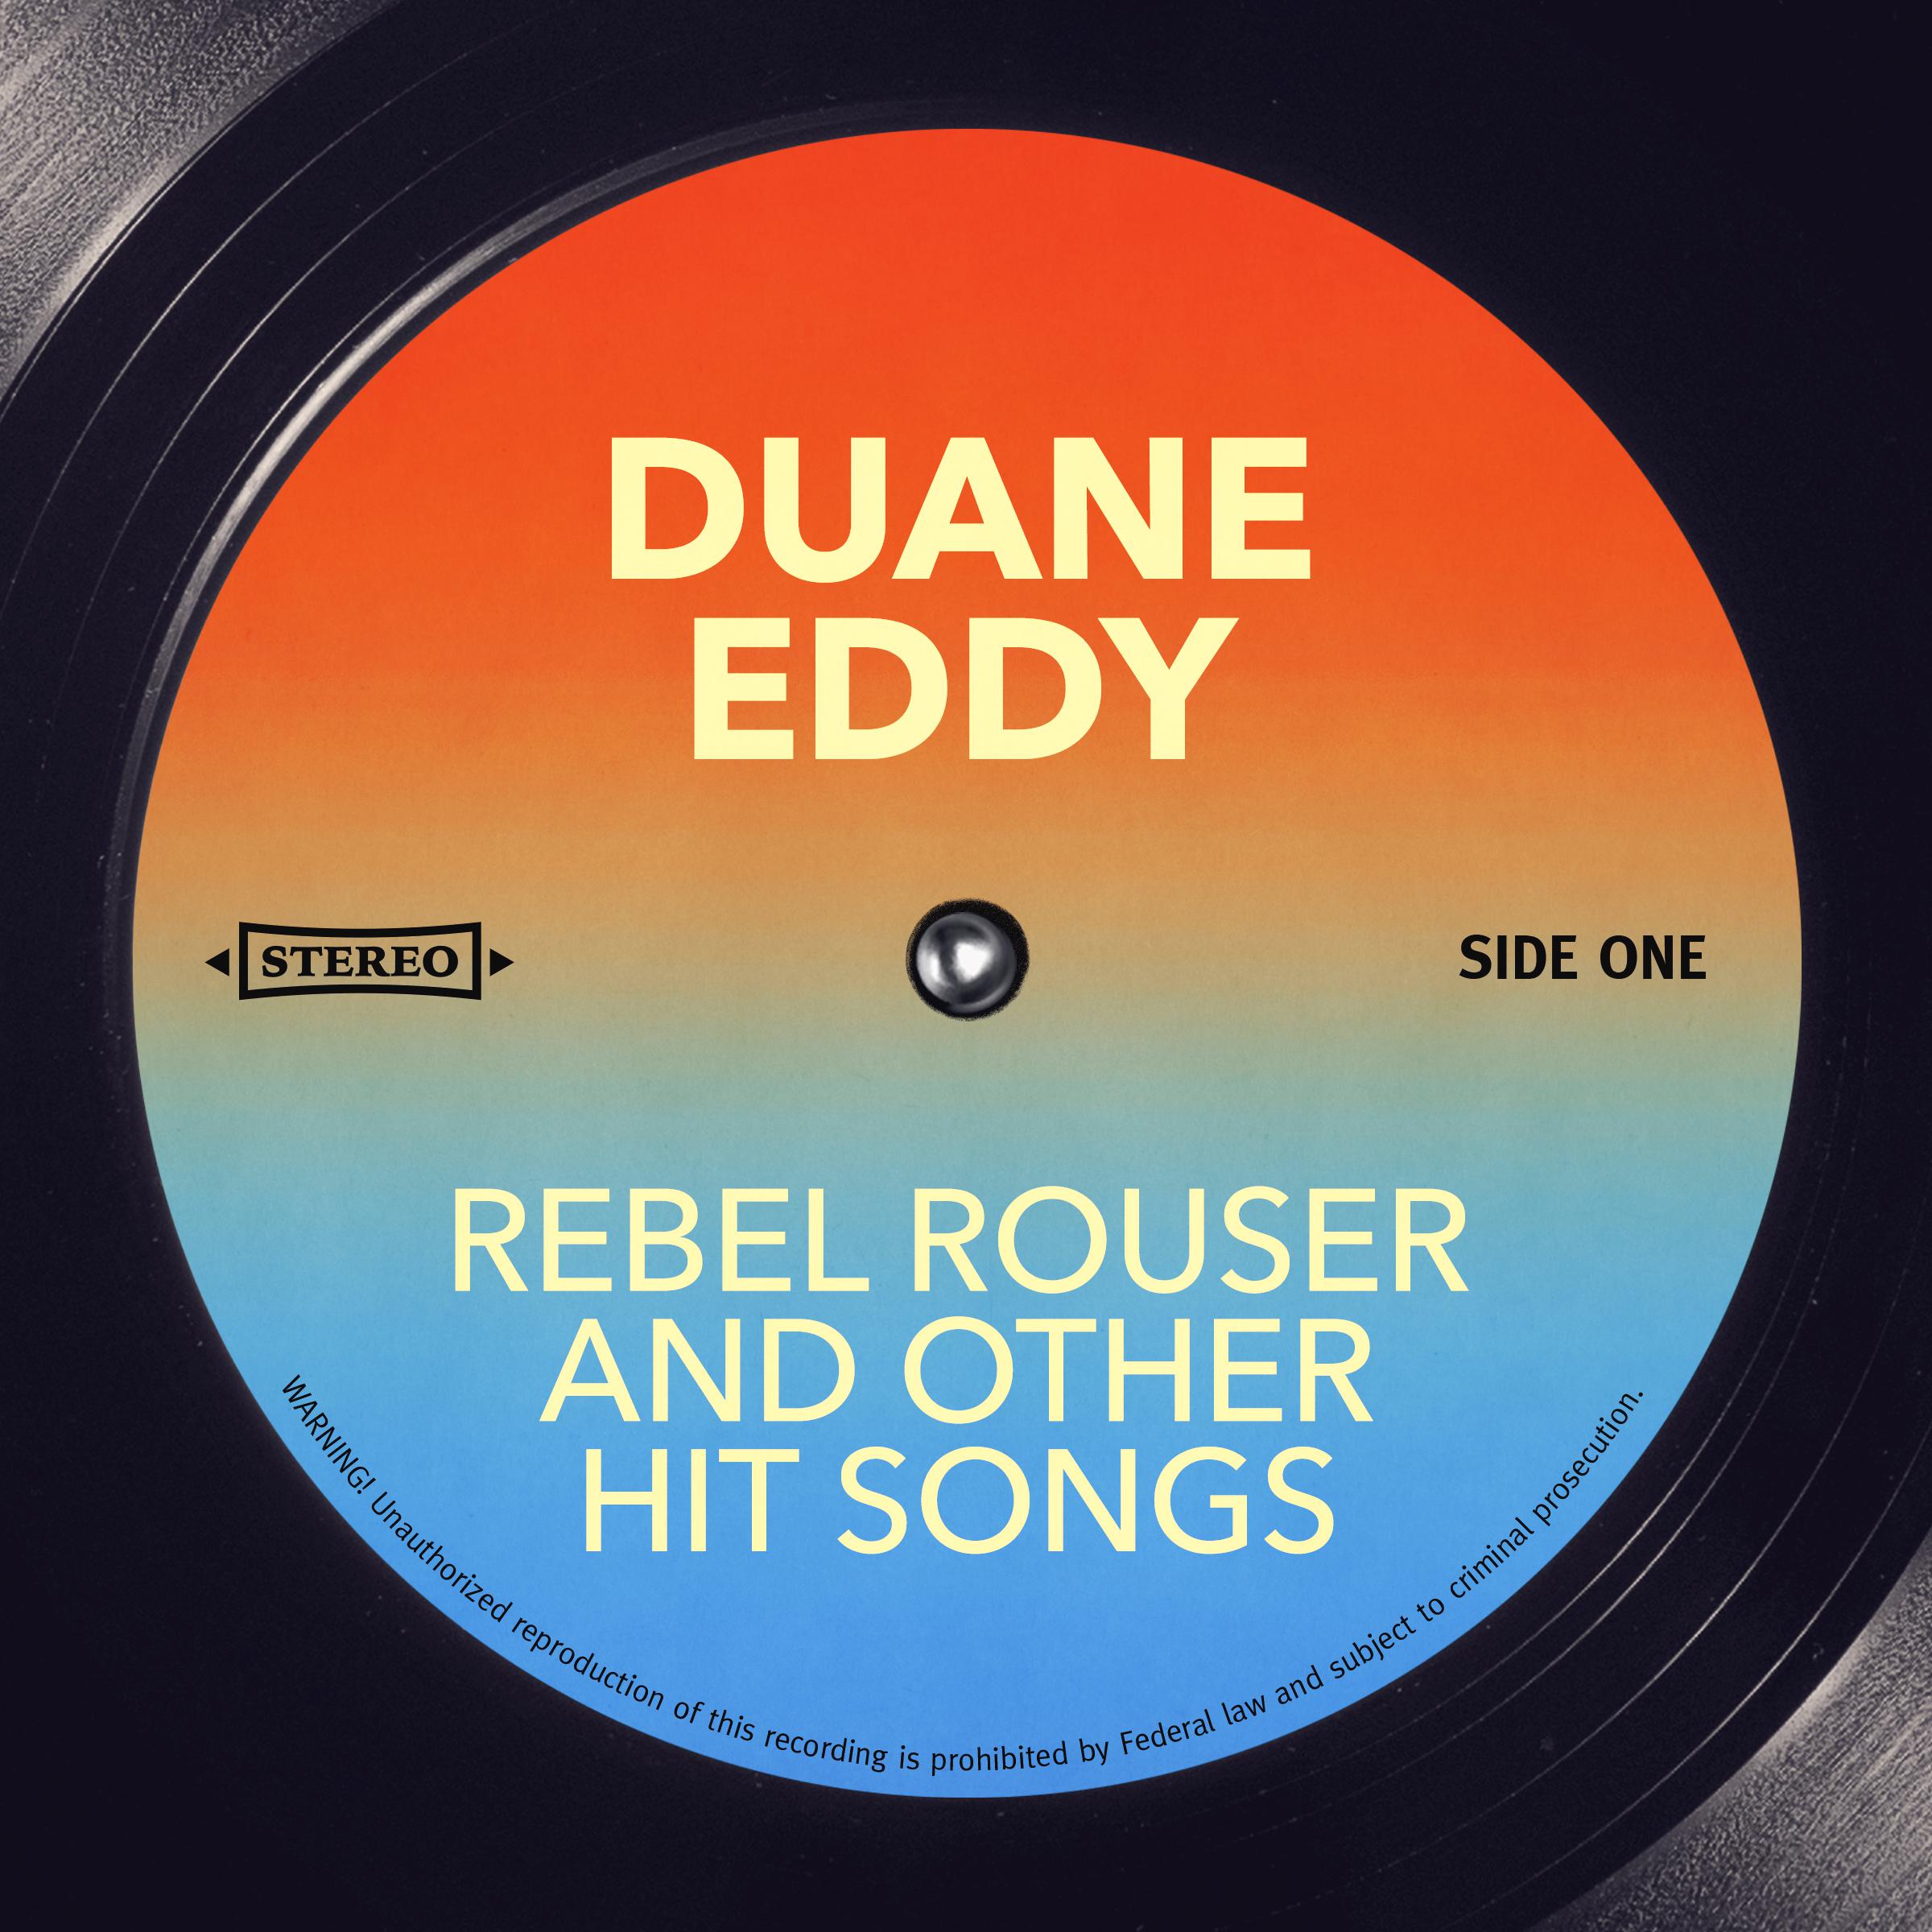 Rebel Rouser and other Hit Songs